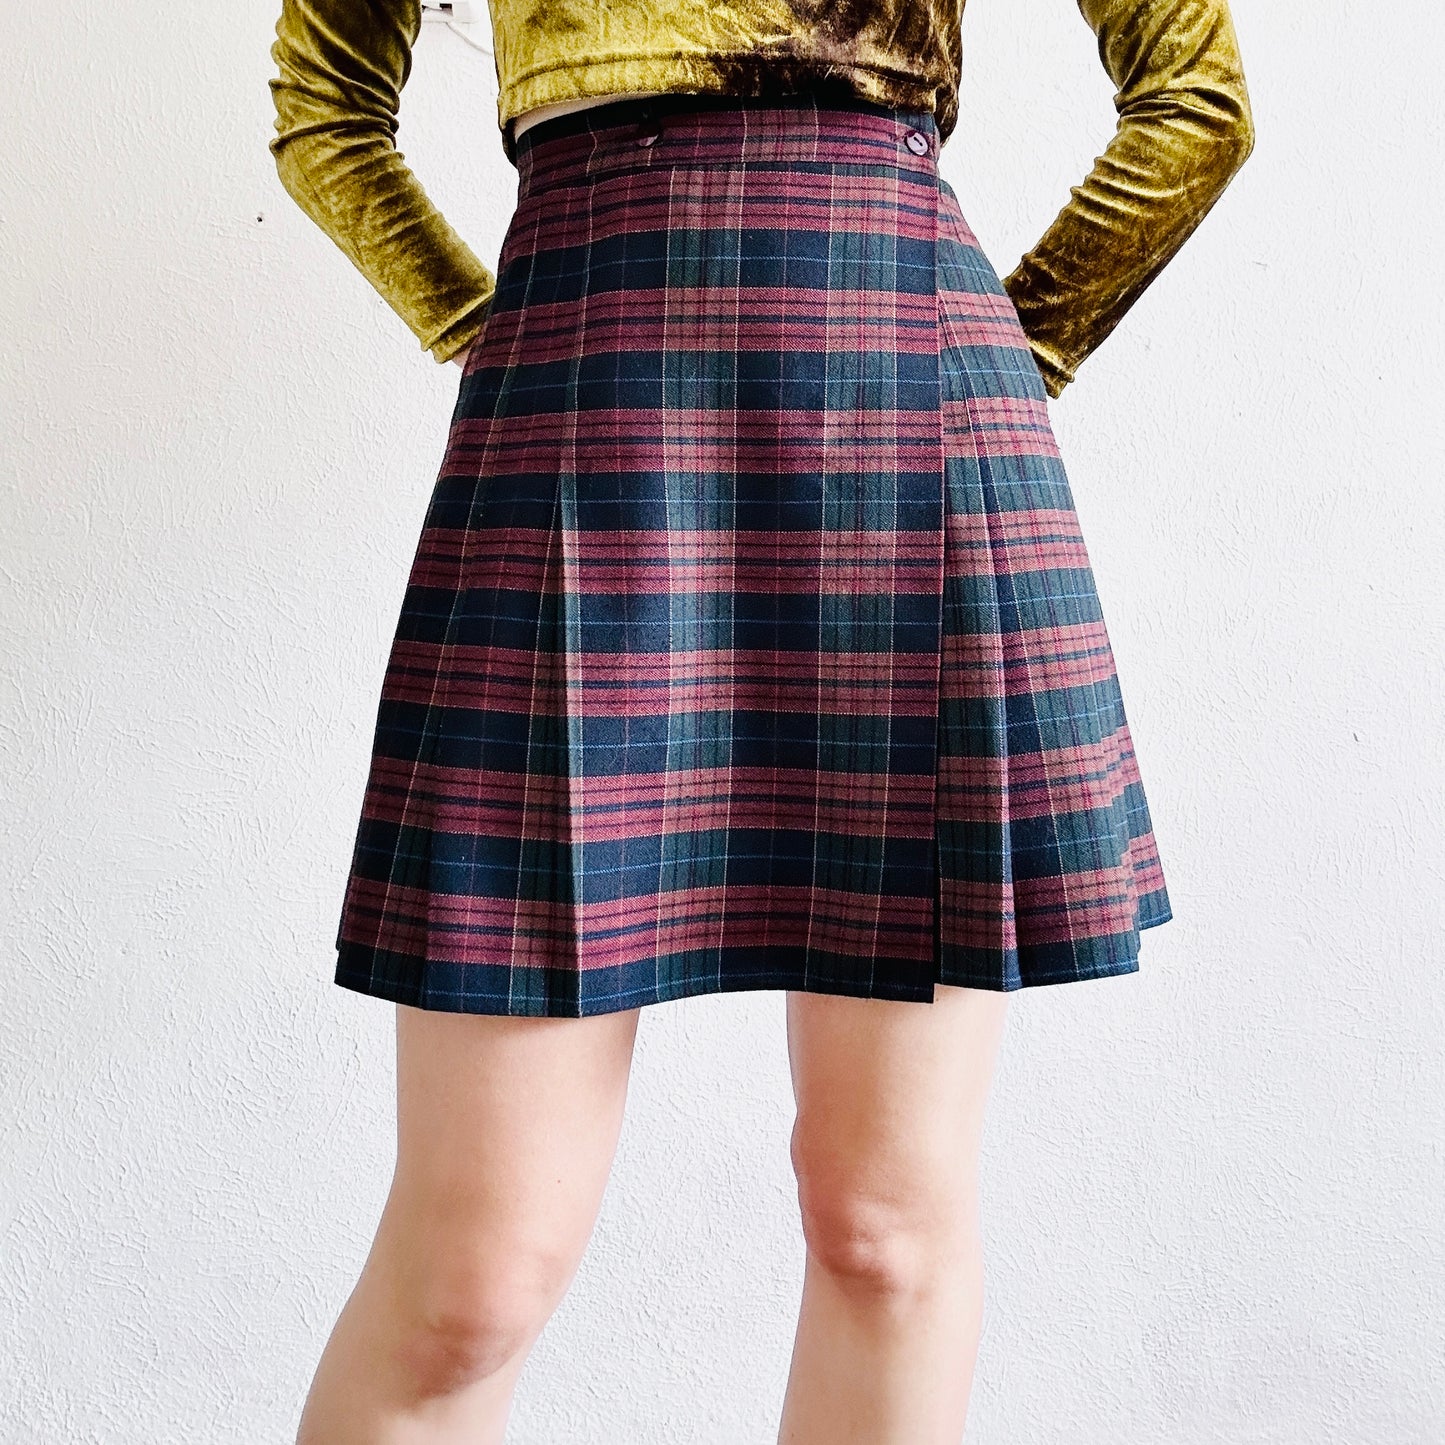 90’S VINTAGE WOOL PLAID SKIRT // SIZE SMALL